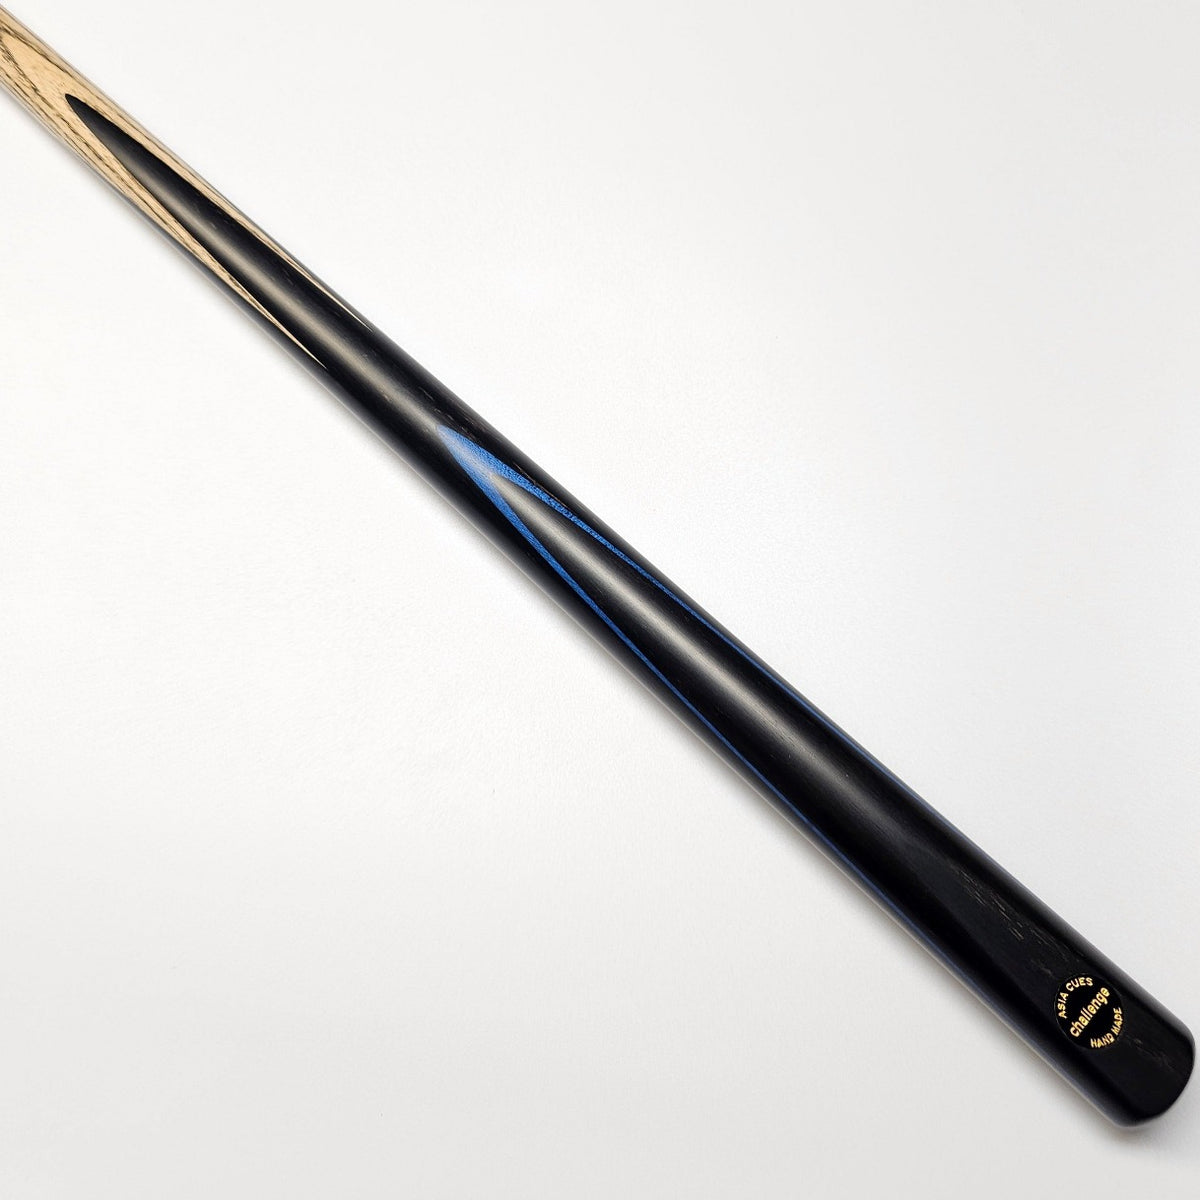 Asia Cues Challenge Range One Piece Cue Ash Shaft Ebony Butt with Blue Veneer. Butt View